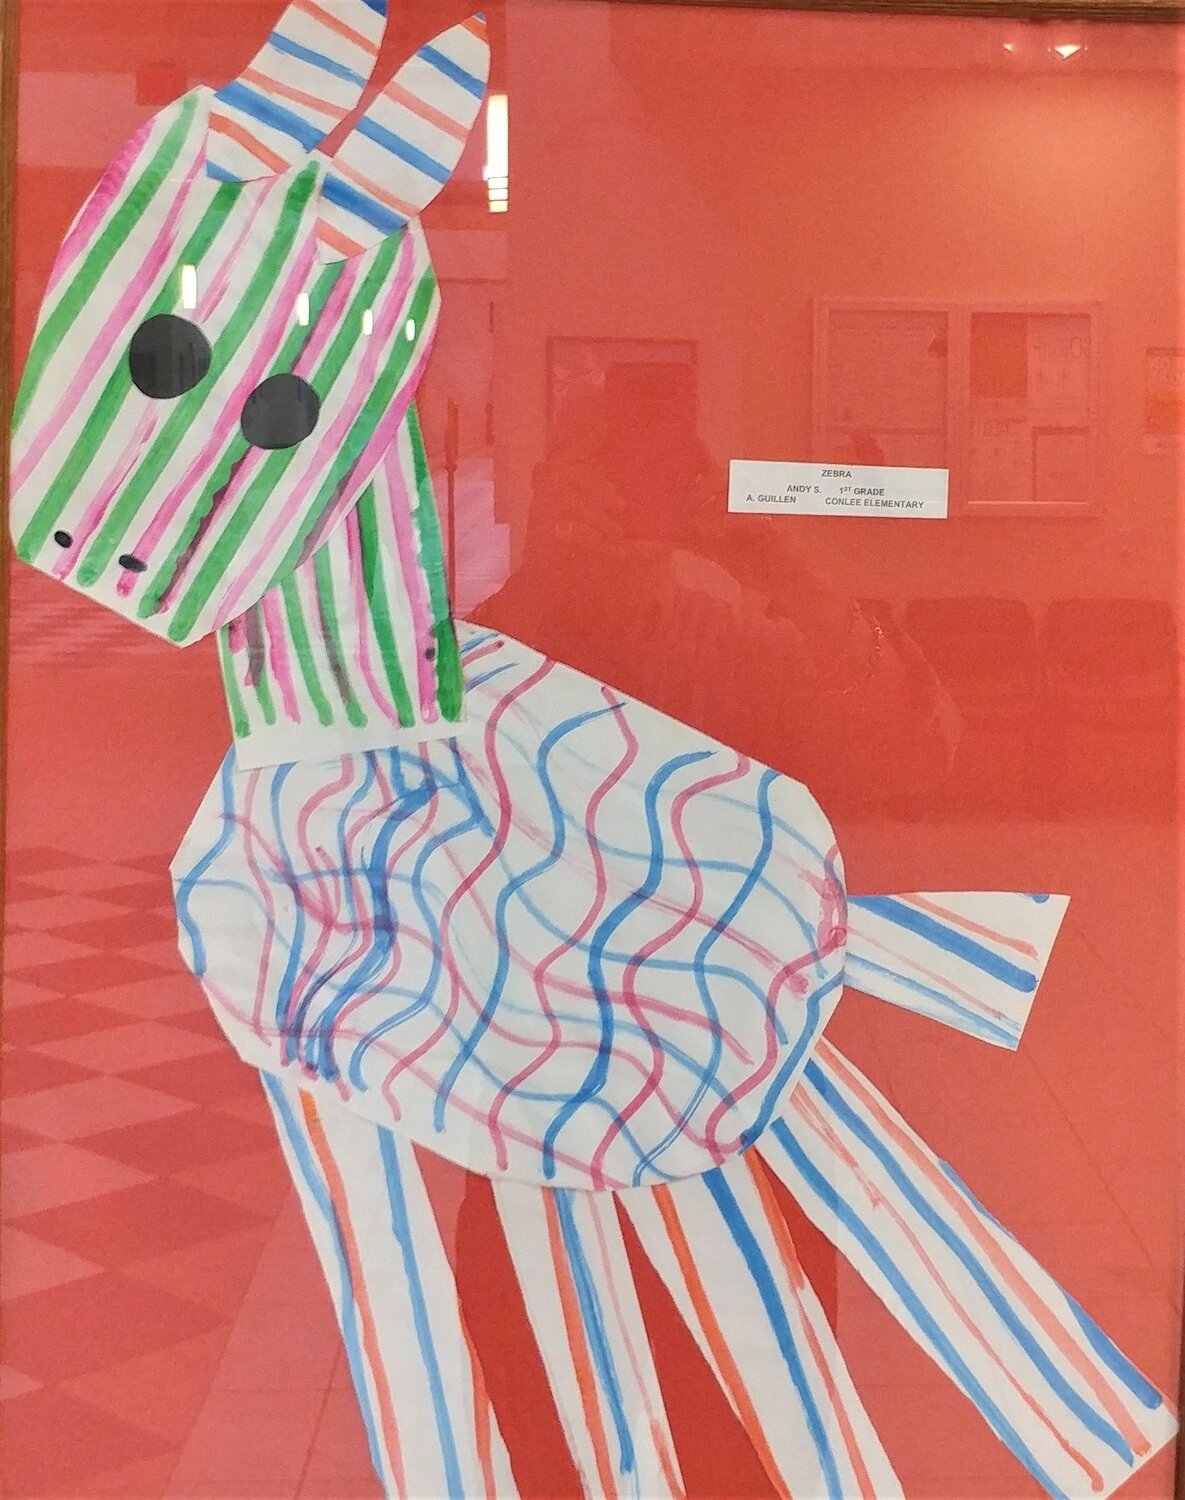 “Zebra,” by Andy S., a first grader at Conlee Elementary School